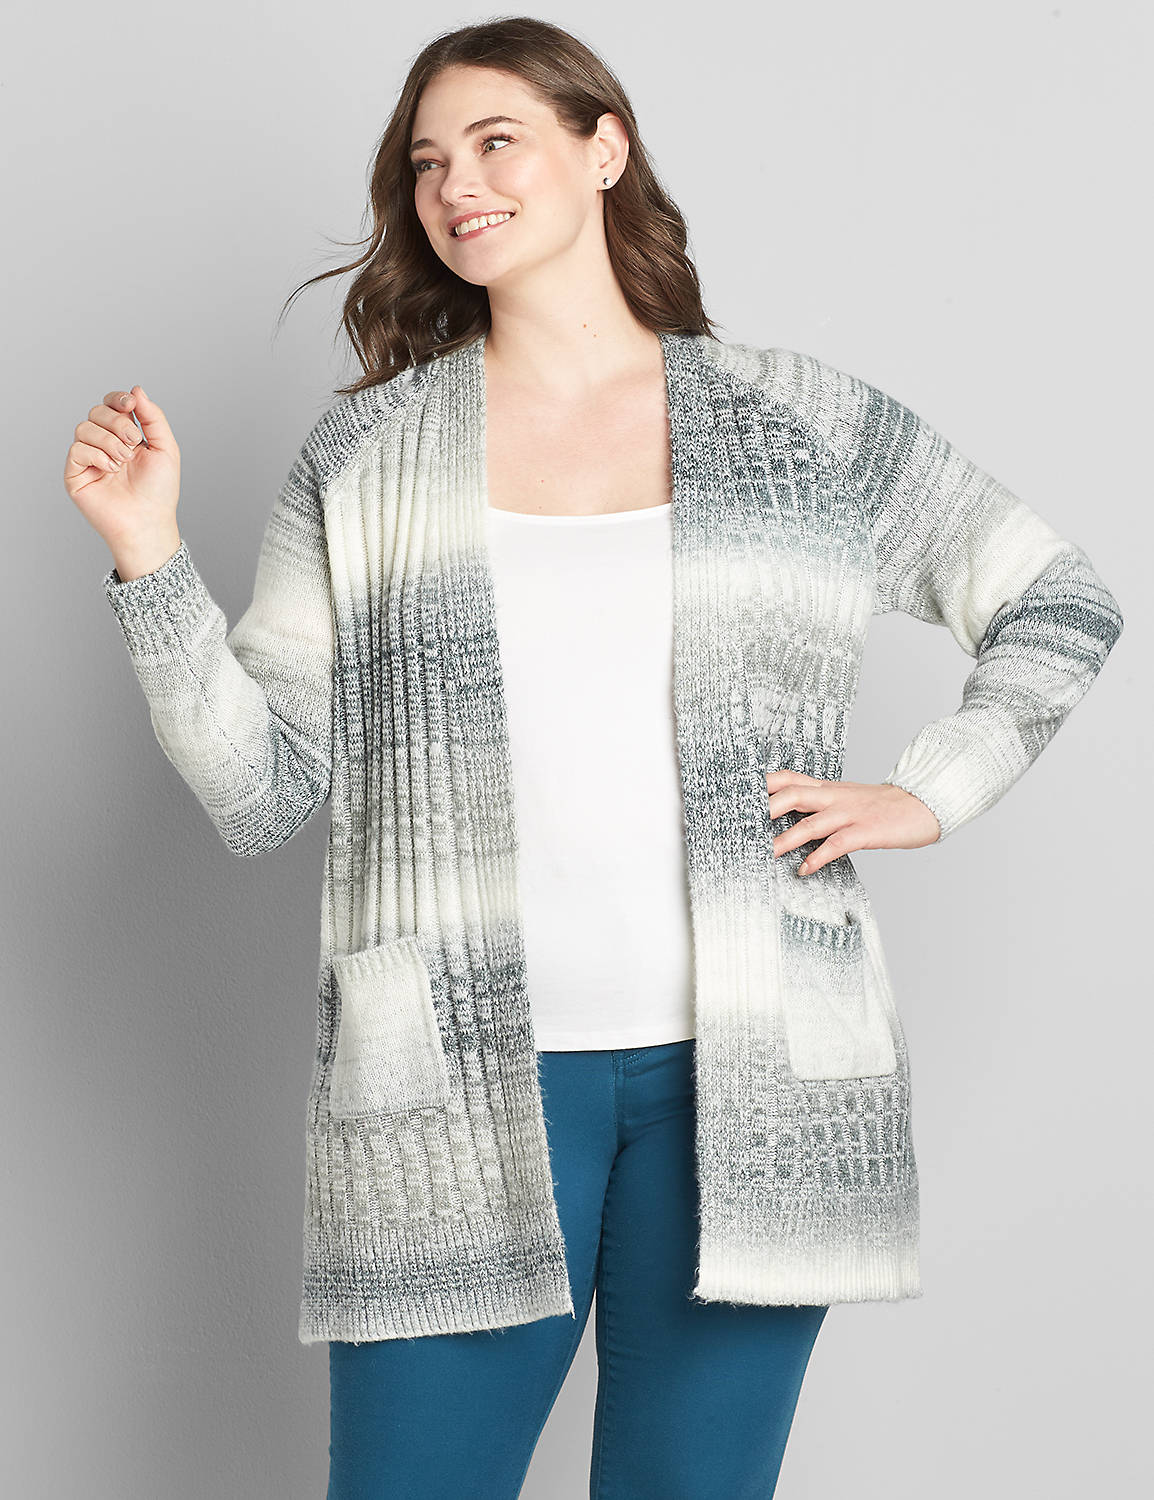 Spacedye Open-Front Cardigan Product Image 1